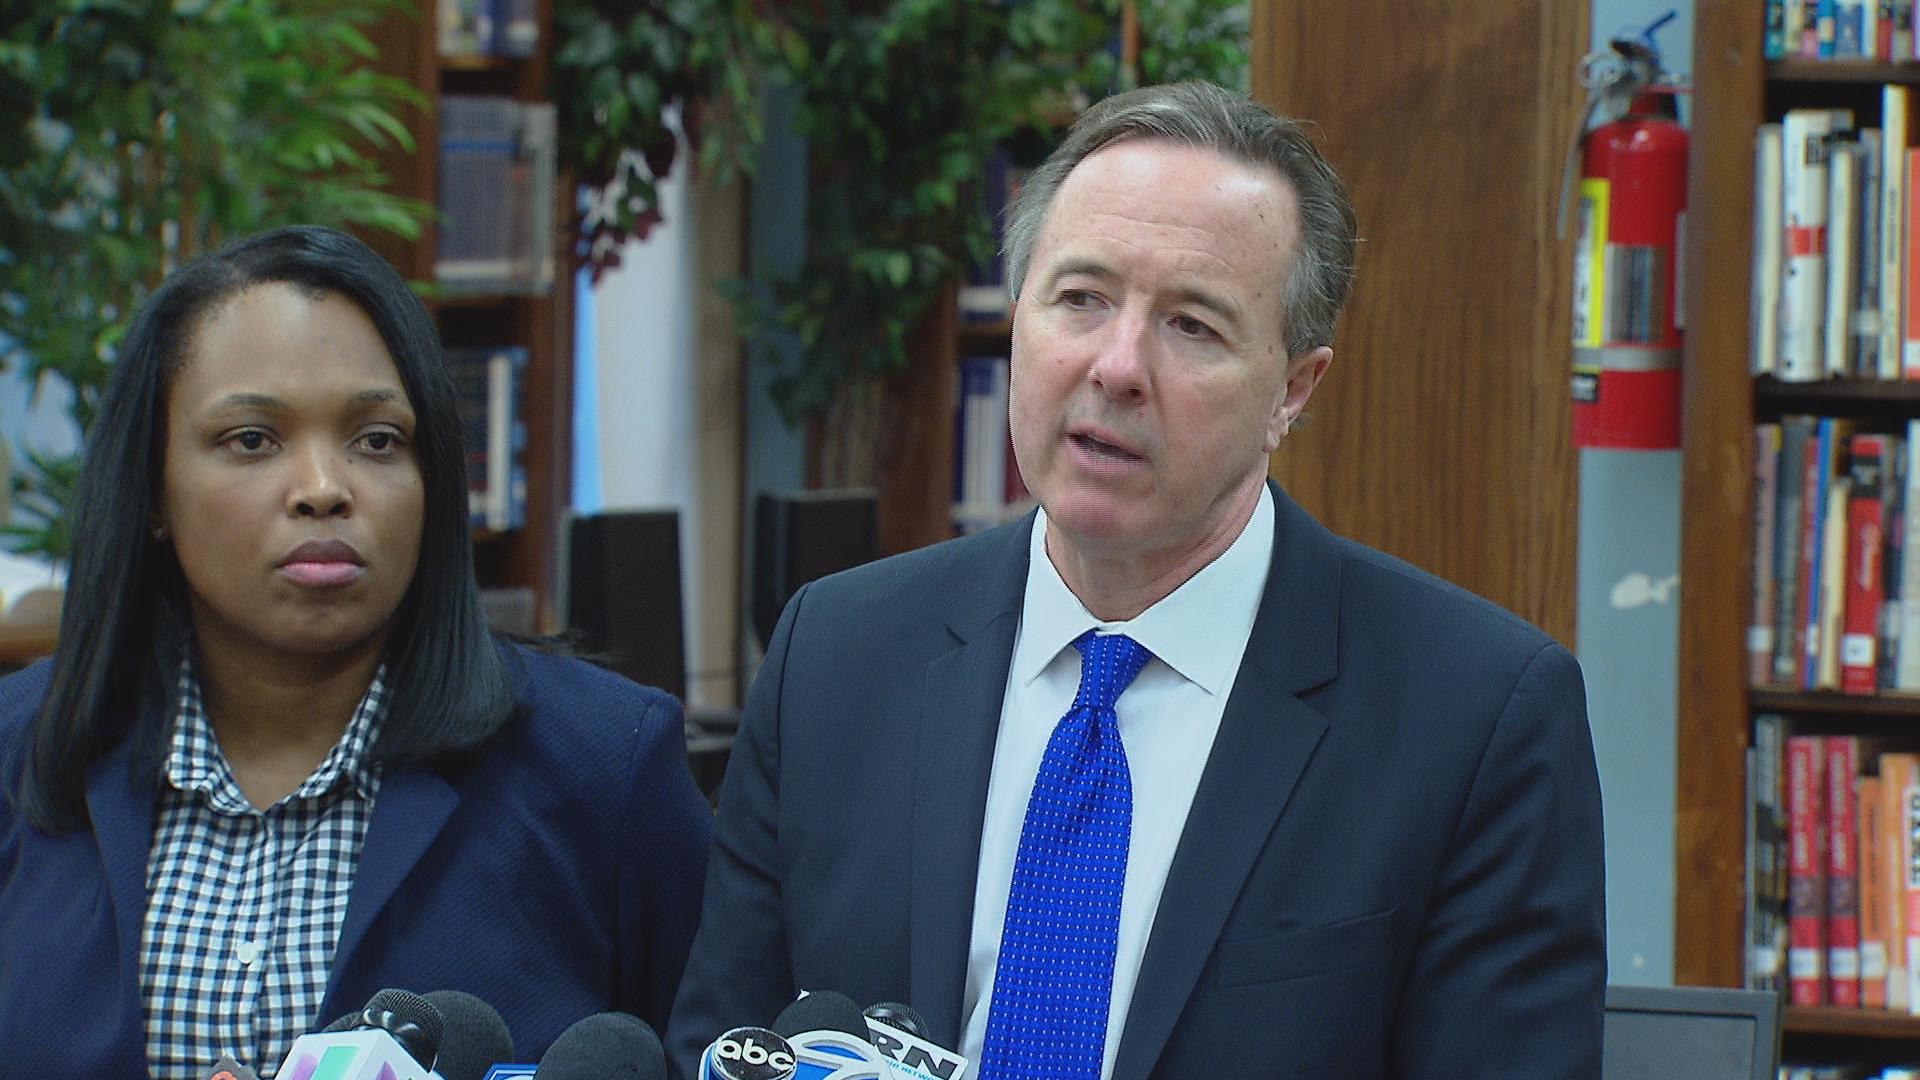 “When we get through this, we will look at our legal options,” Forrest Claypool said Thursday about CTU's planned “Day of Action.”